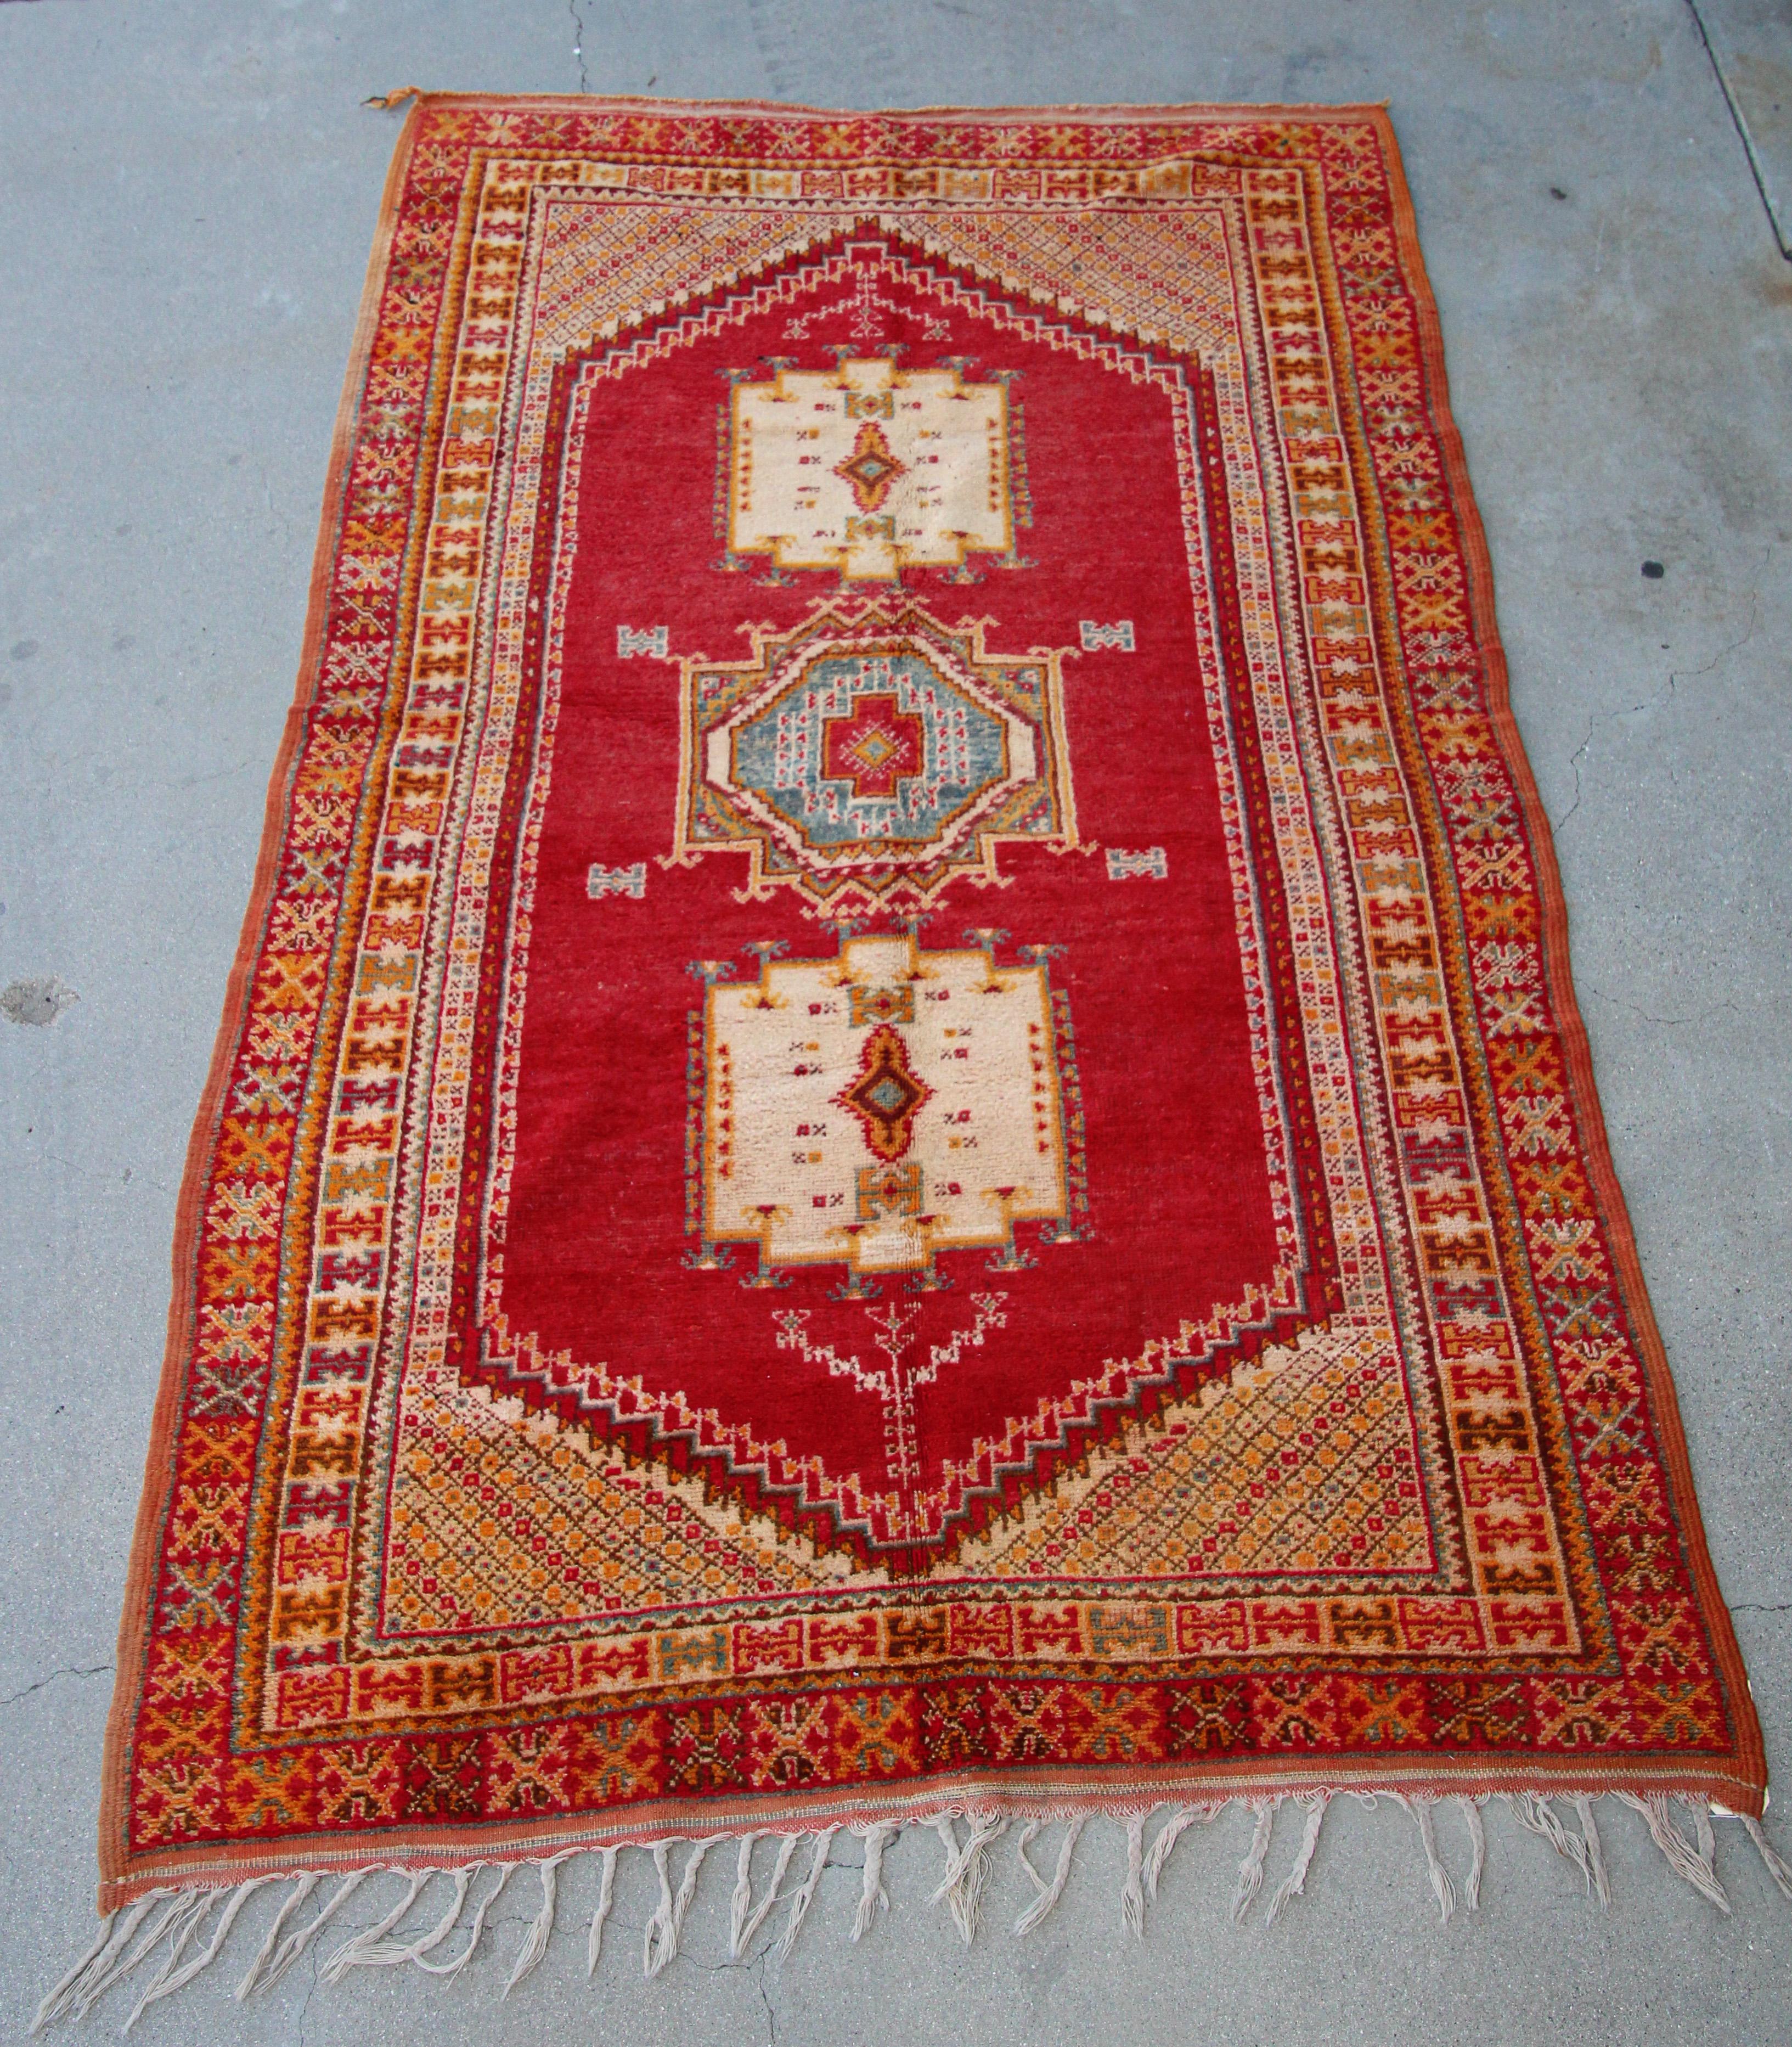 Moroccan vintage tribal rug handwoven by Berber Moroccan women using organic lamb wo and organic dye.North African Moroccan tribal runner with low pile handwoven wo, hand-knotted by the Berber tribes of Morocco with traditional geometric tribal